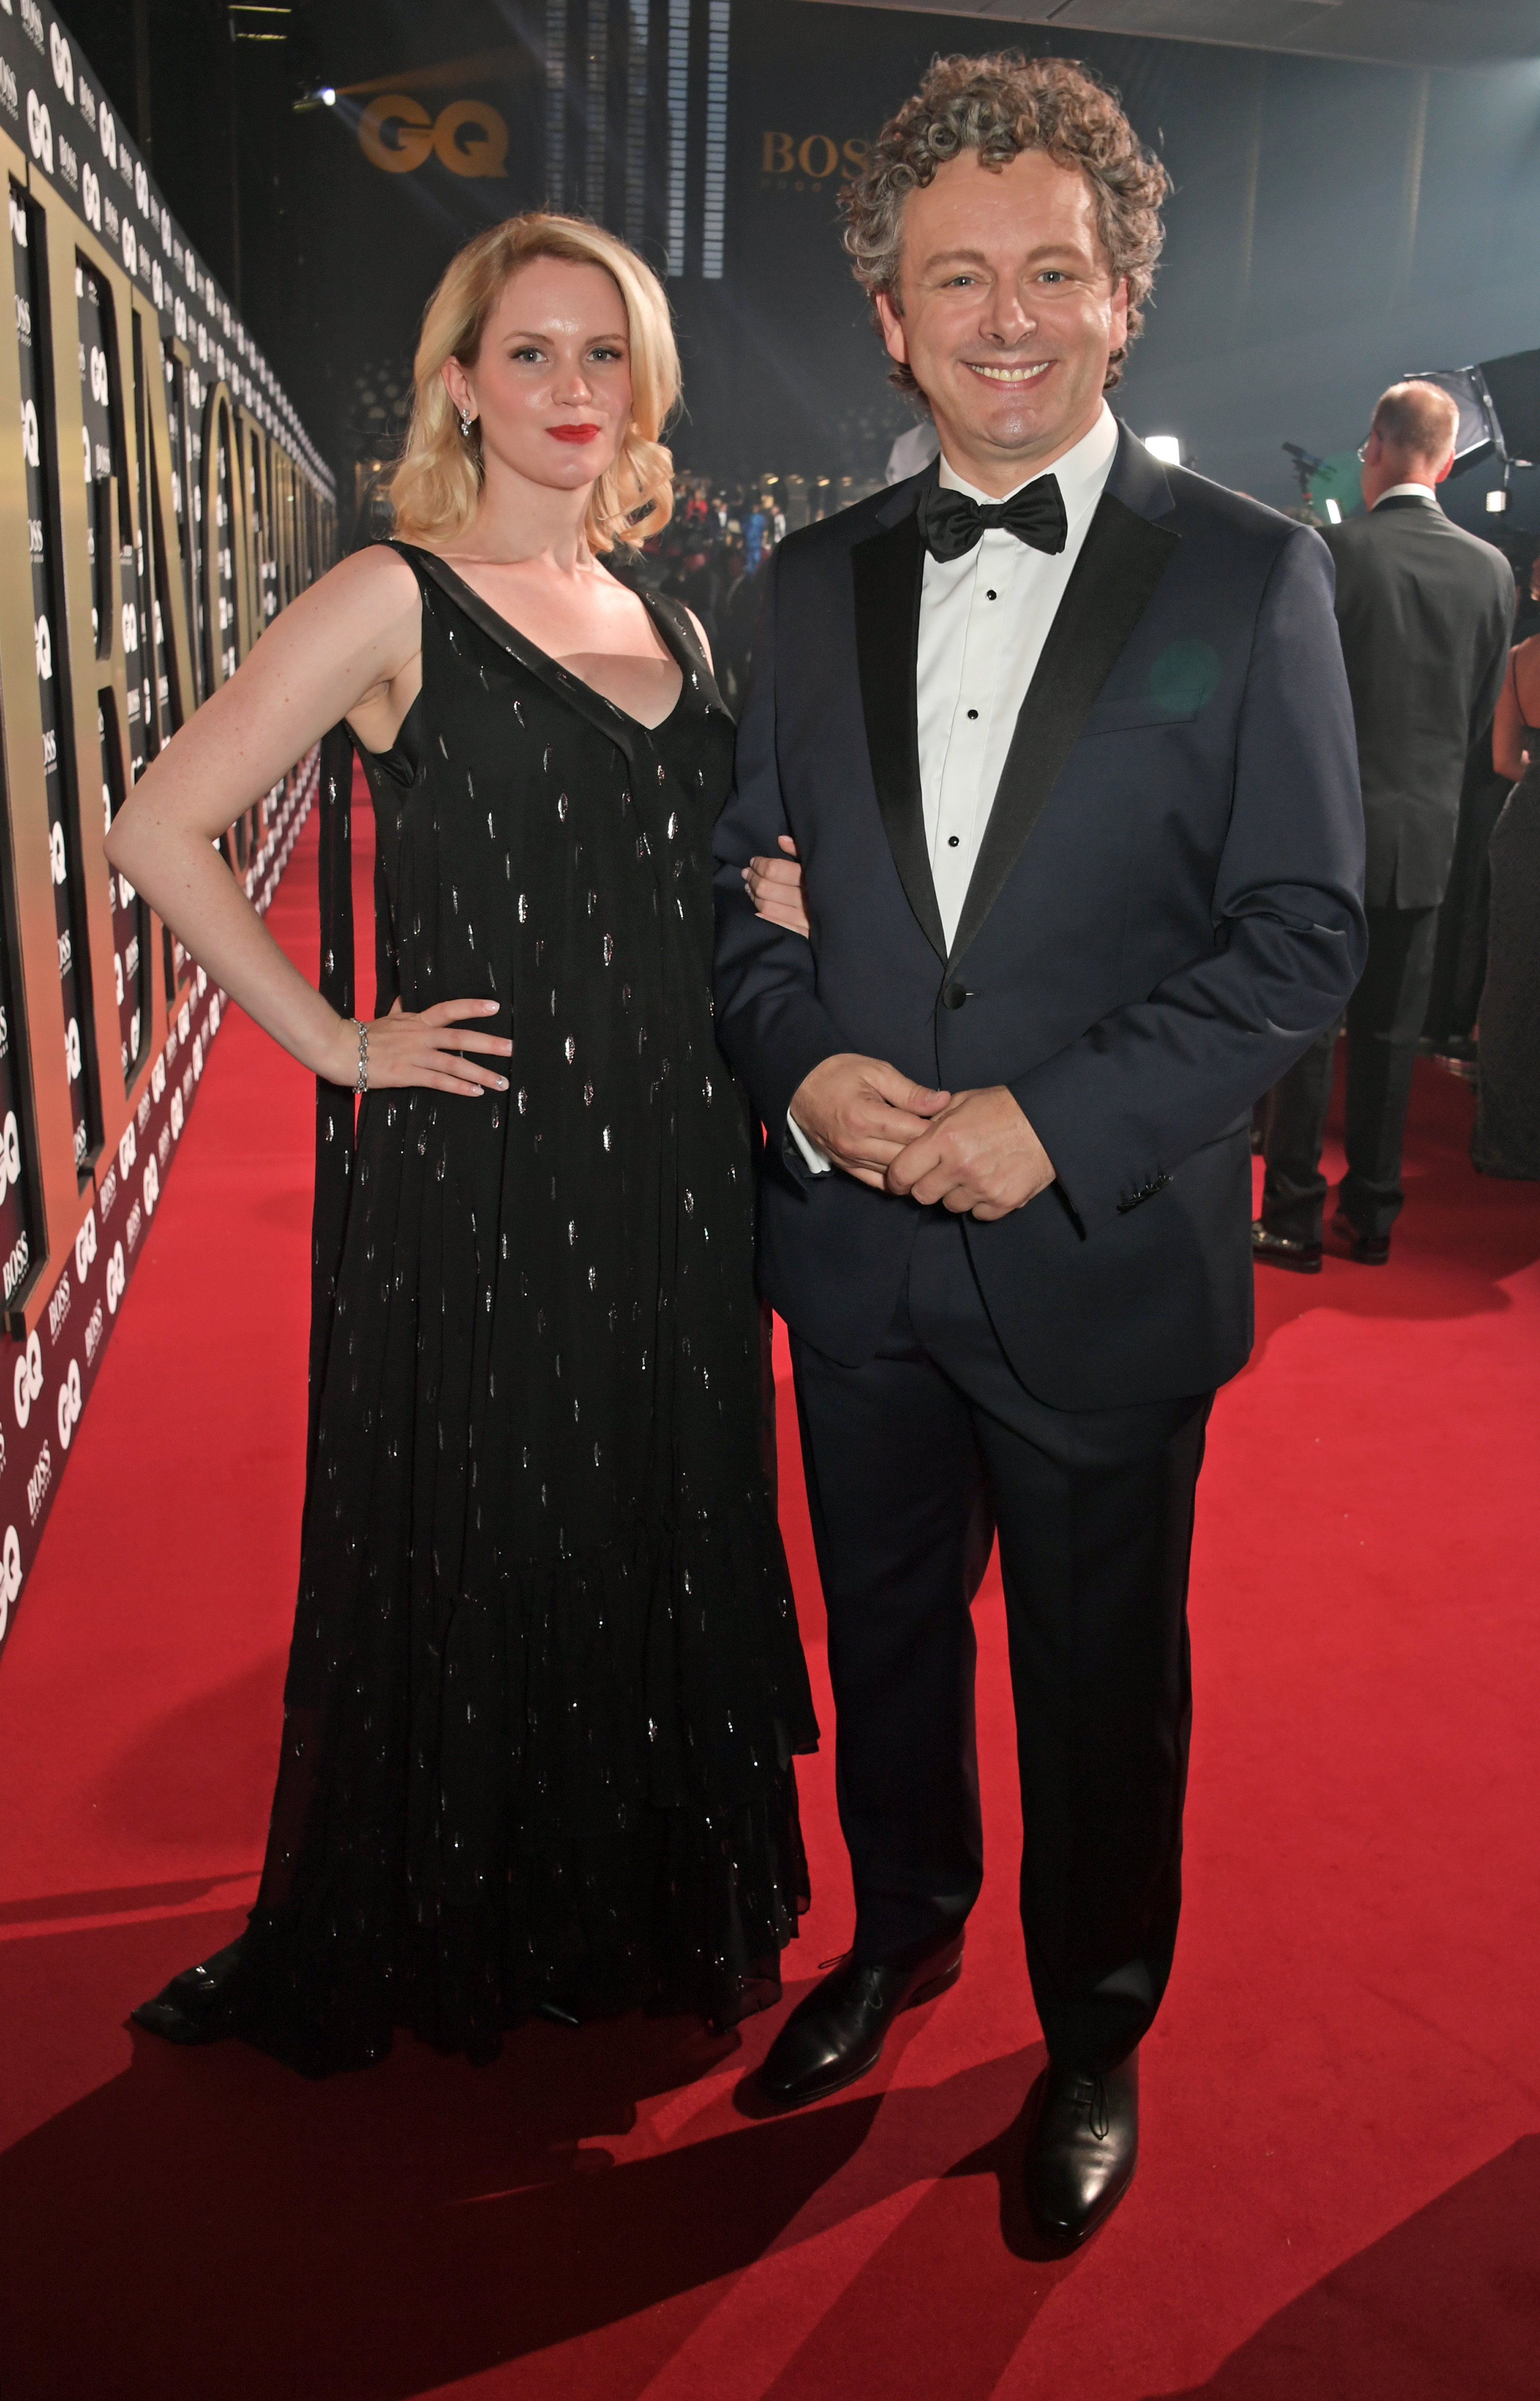  Anna Lundberg and Michael Sheen pose at the GQ Men Of The Year Awards 2019 on September 3, 2019, in London | Source: Getty Images